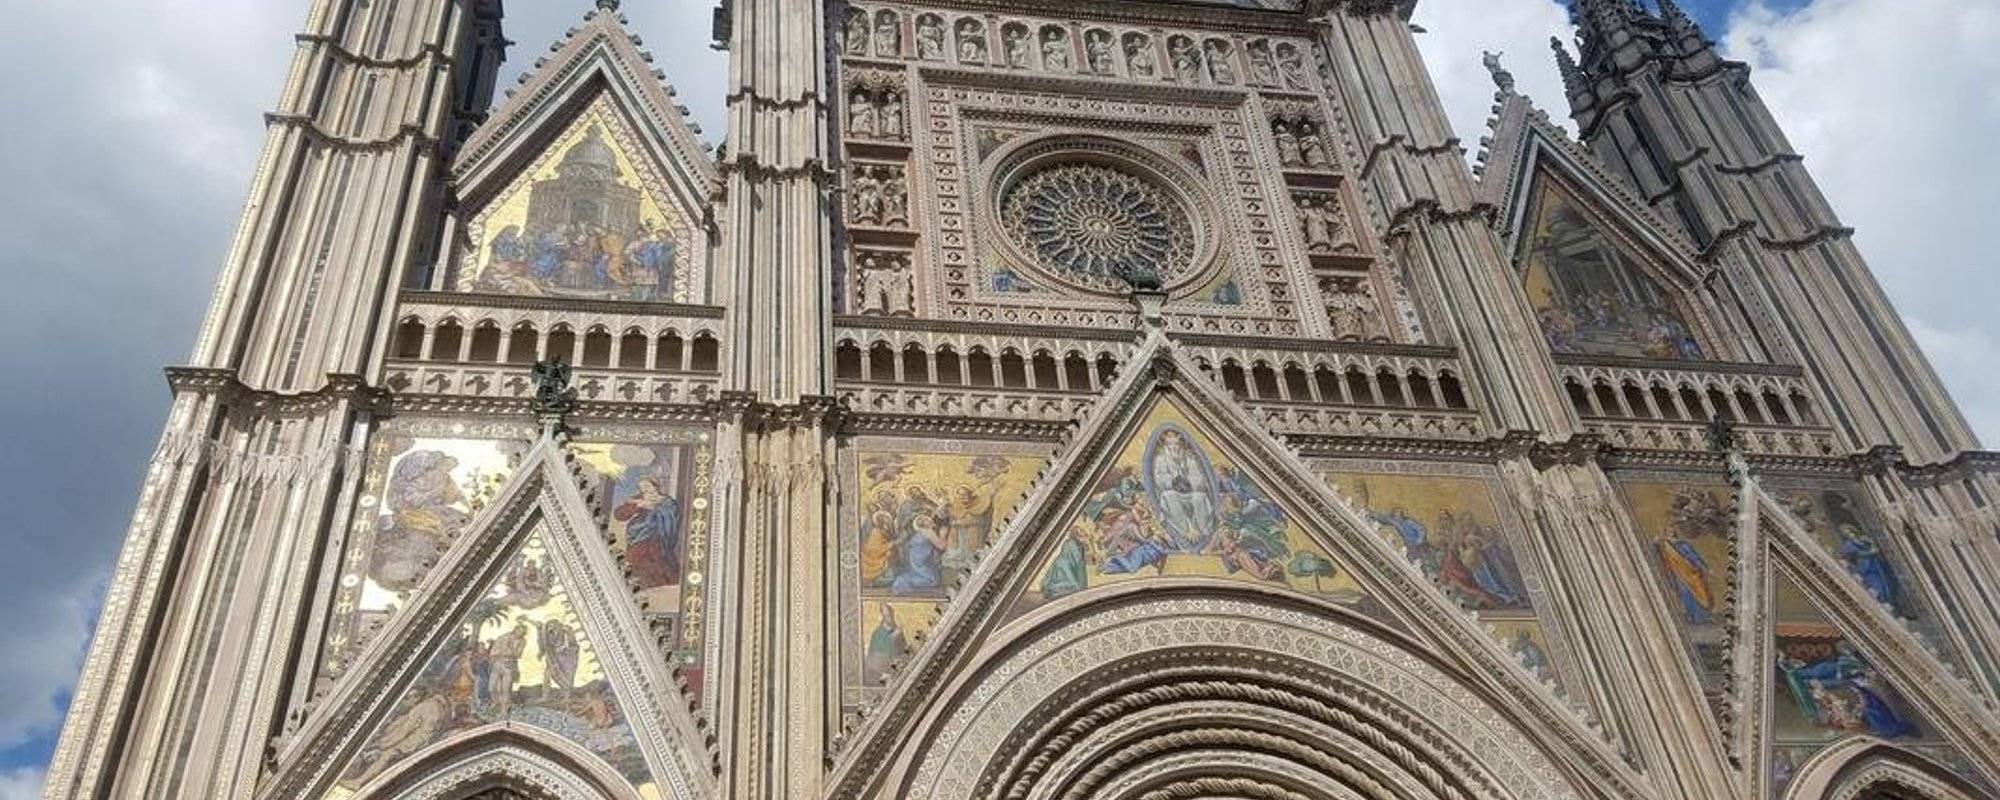 TRAVELMAN ORVIETO, ITALY: Another Day, Another Duomo